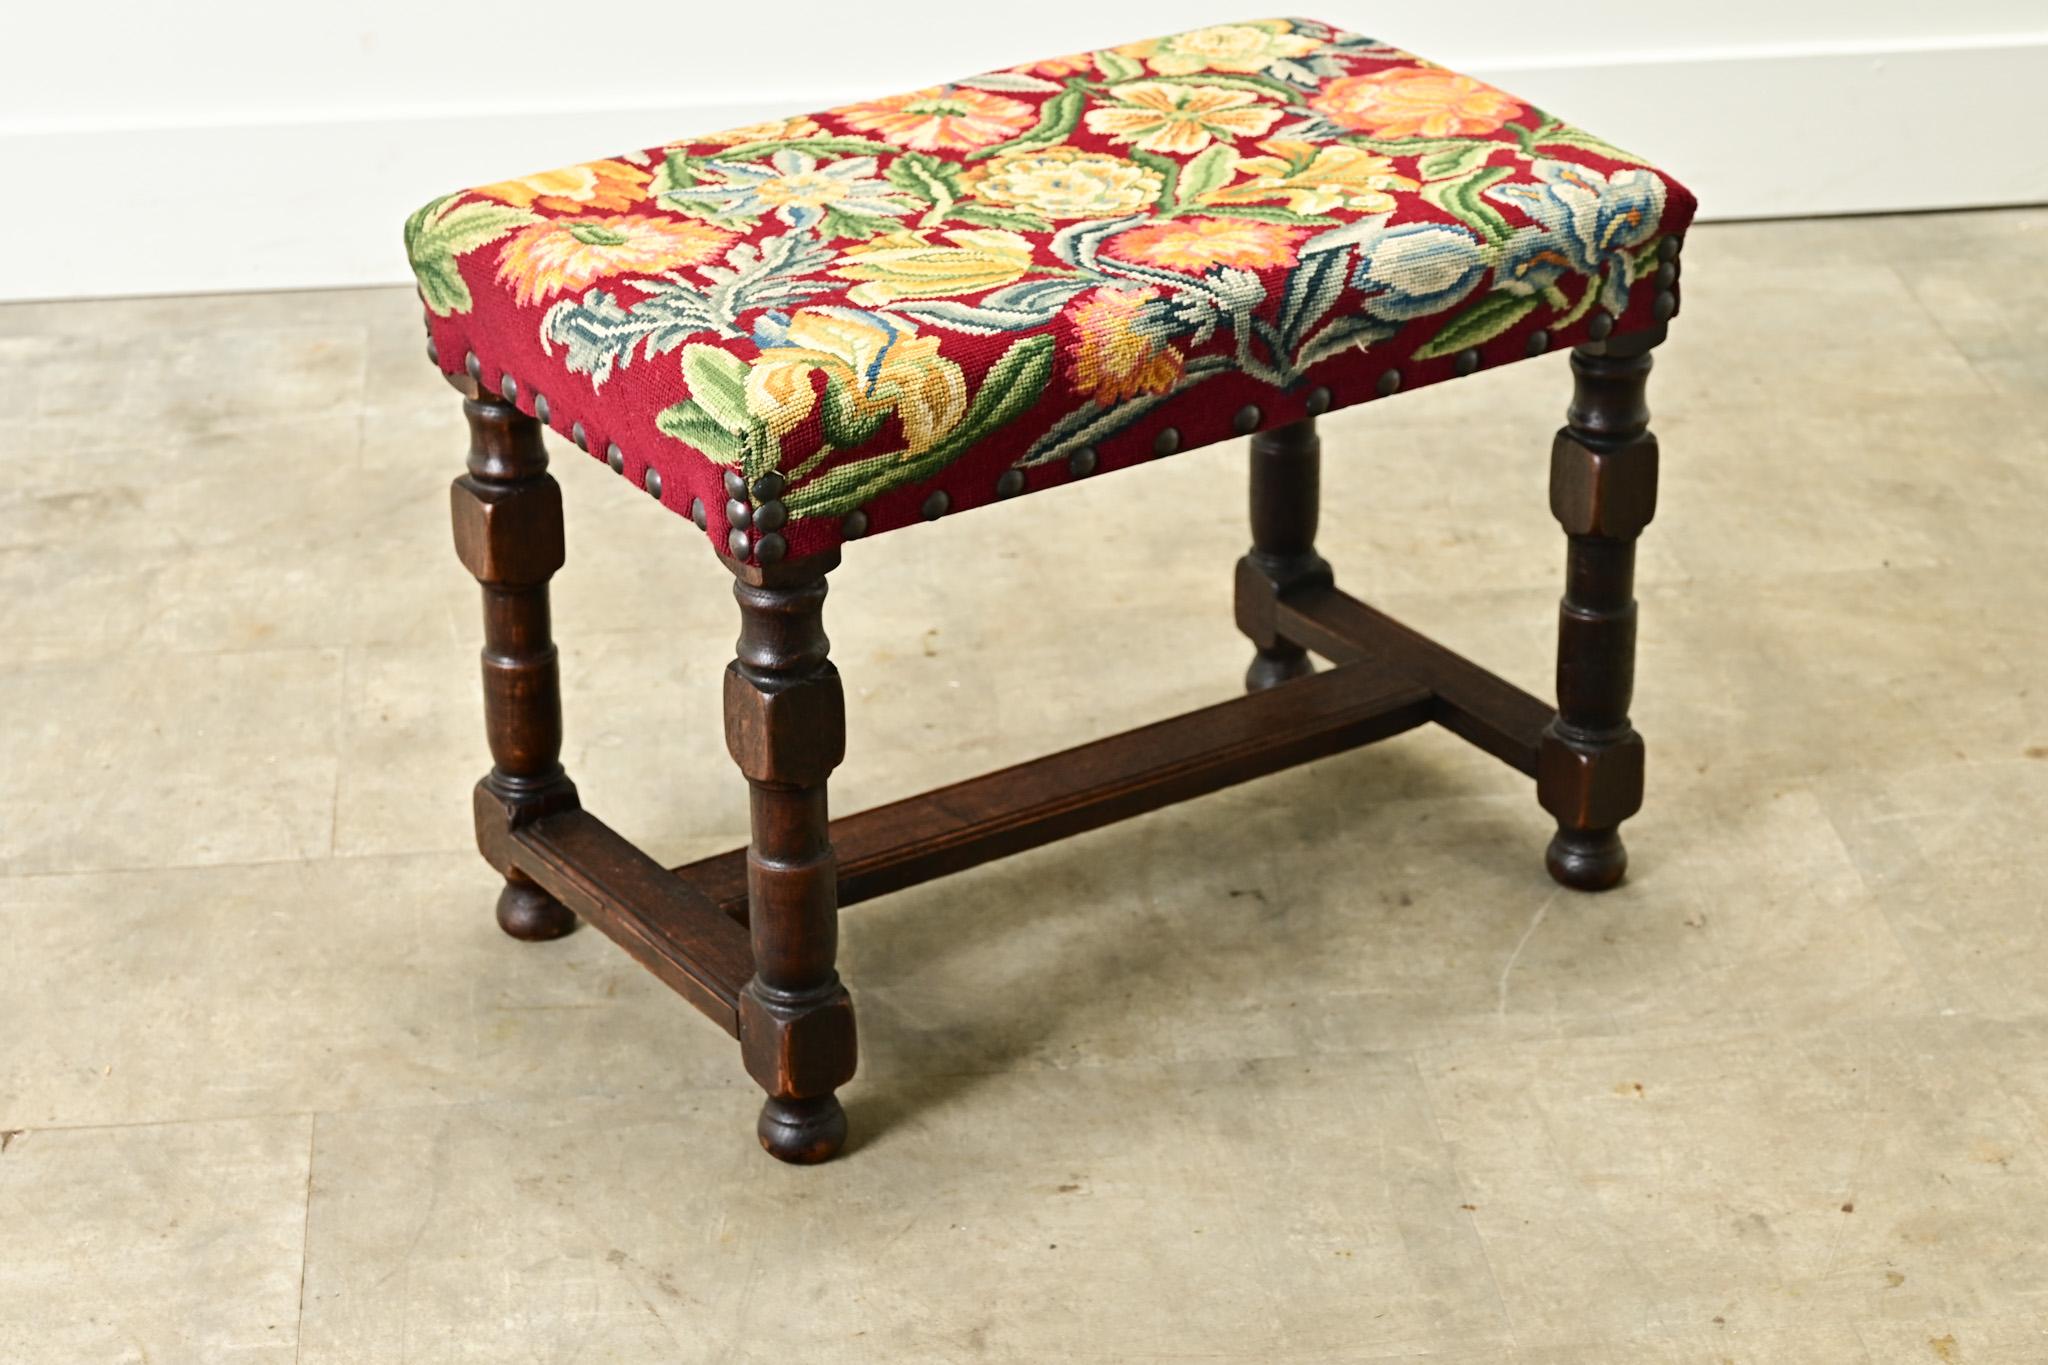 A French oak and tapestry stool made in the 1800’s. This comfortable stool is upholstered in a bright and colorful floral needlepoint tapestry with nailhead trim. Raised on turned solid oak legs connected to a H-shaped stretched for additional